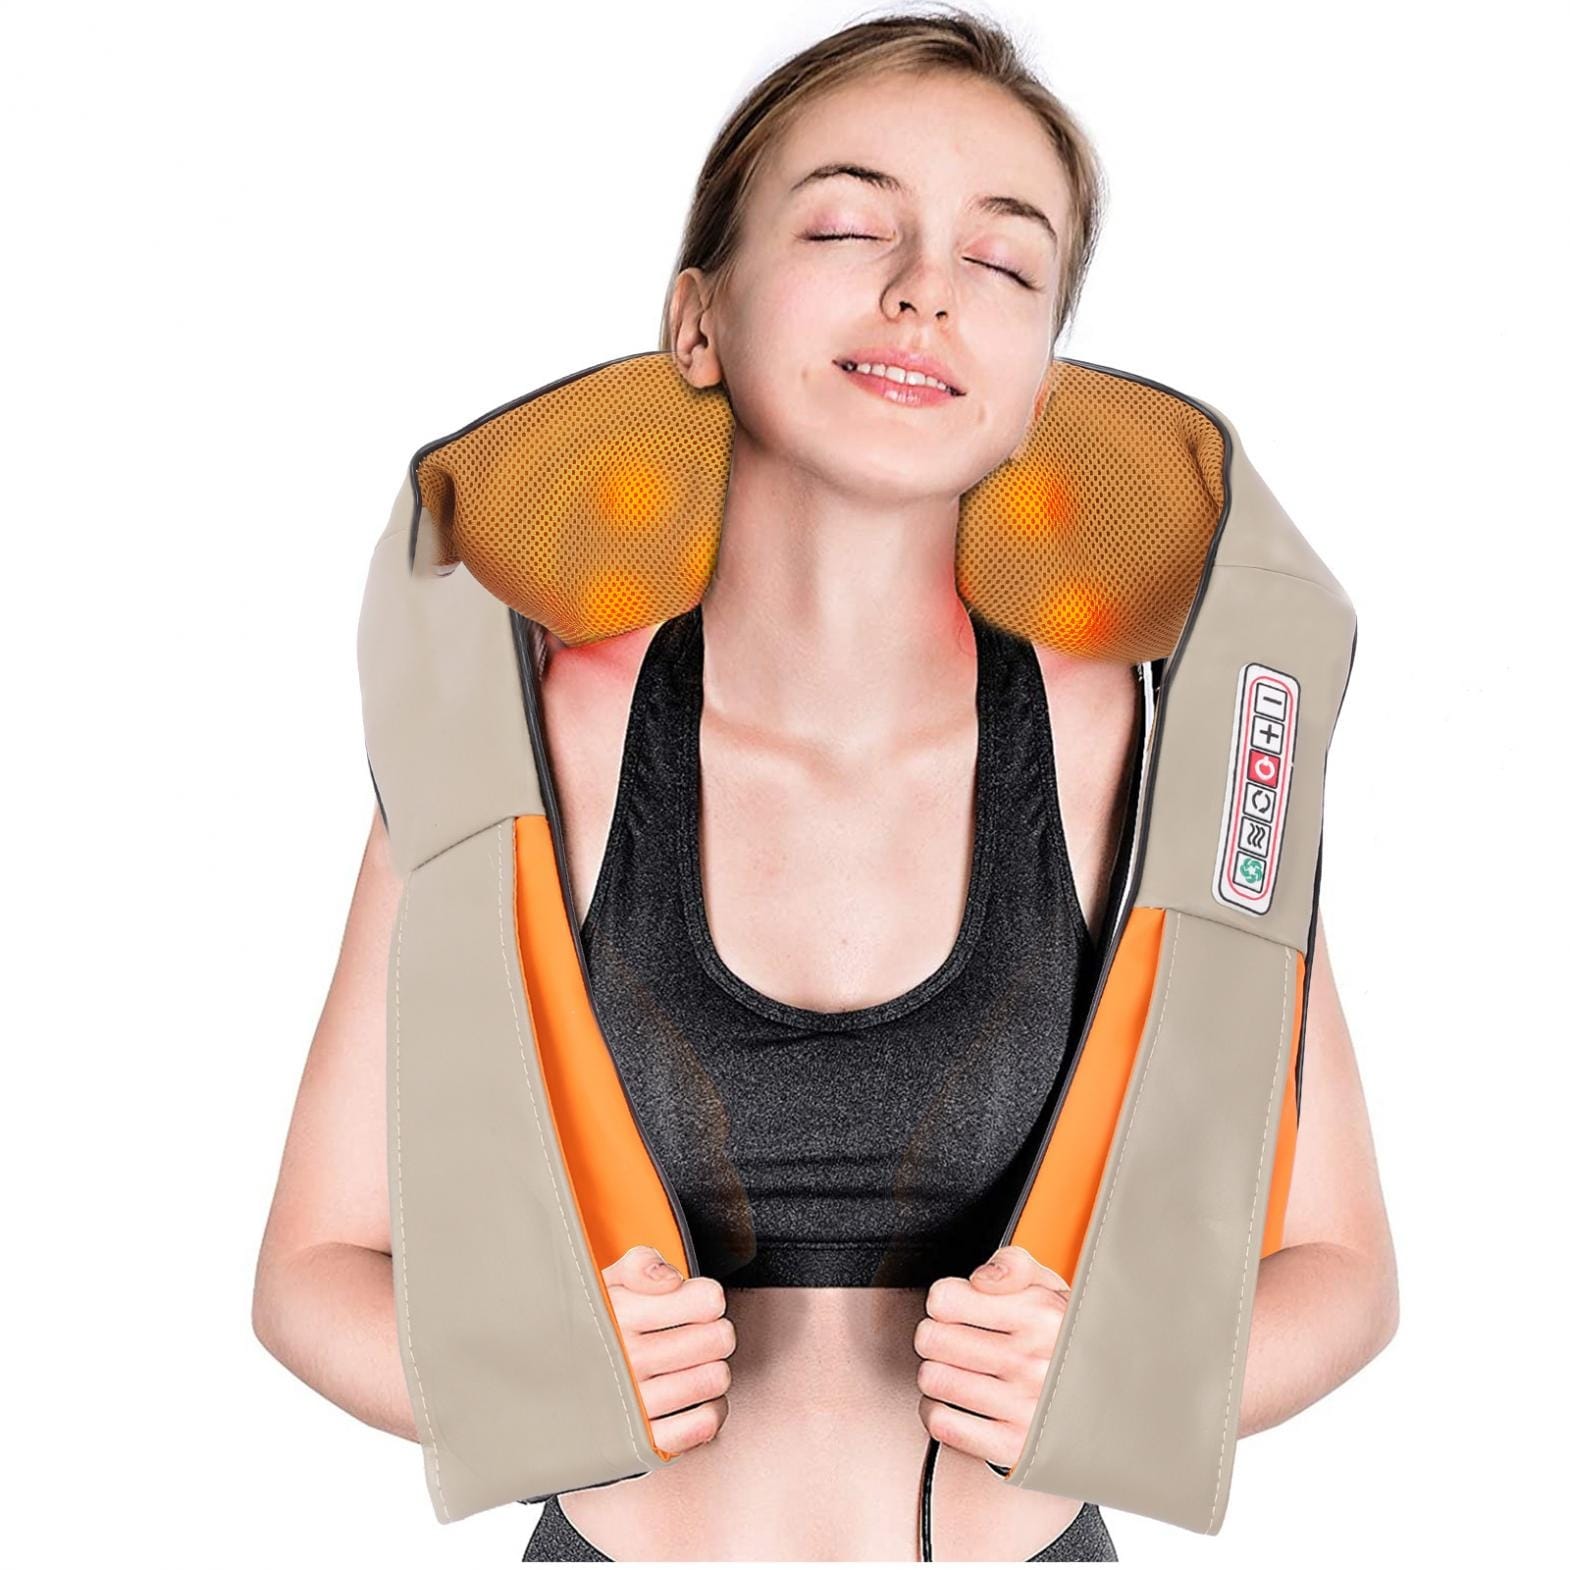 https://ak1.ostkcdn.com/images/products/is/images/direct/02eec4b48a96b6147ad8e8e02306bc3ef0e8e681/Shoulder-Massager-With-Heat-Electric-Shiatsu-Back-Massage-Device-Kneading-Pillow.jpg